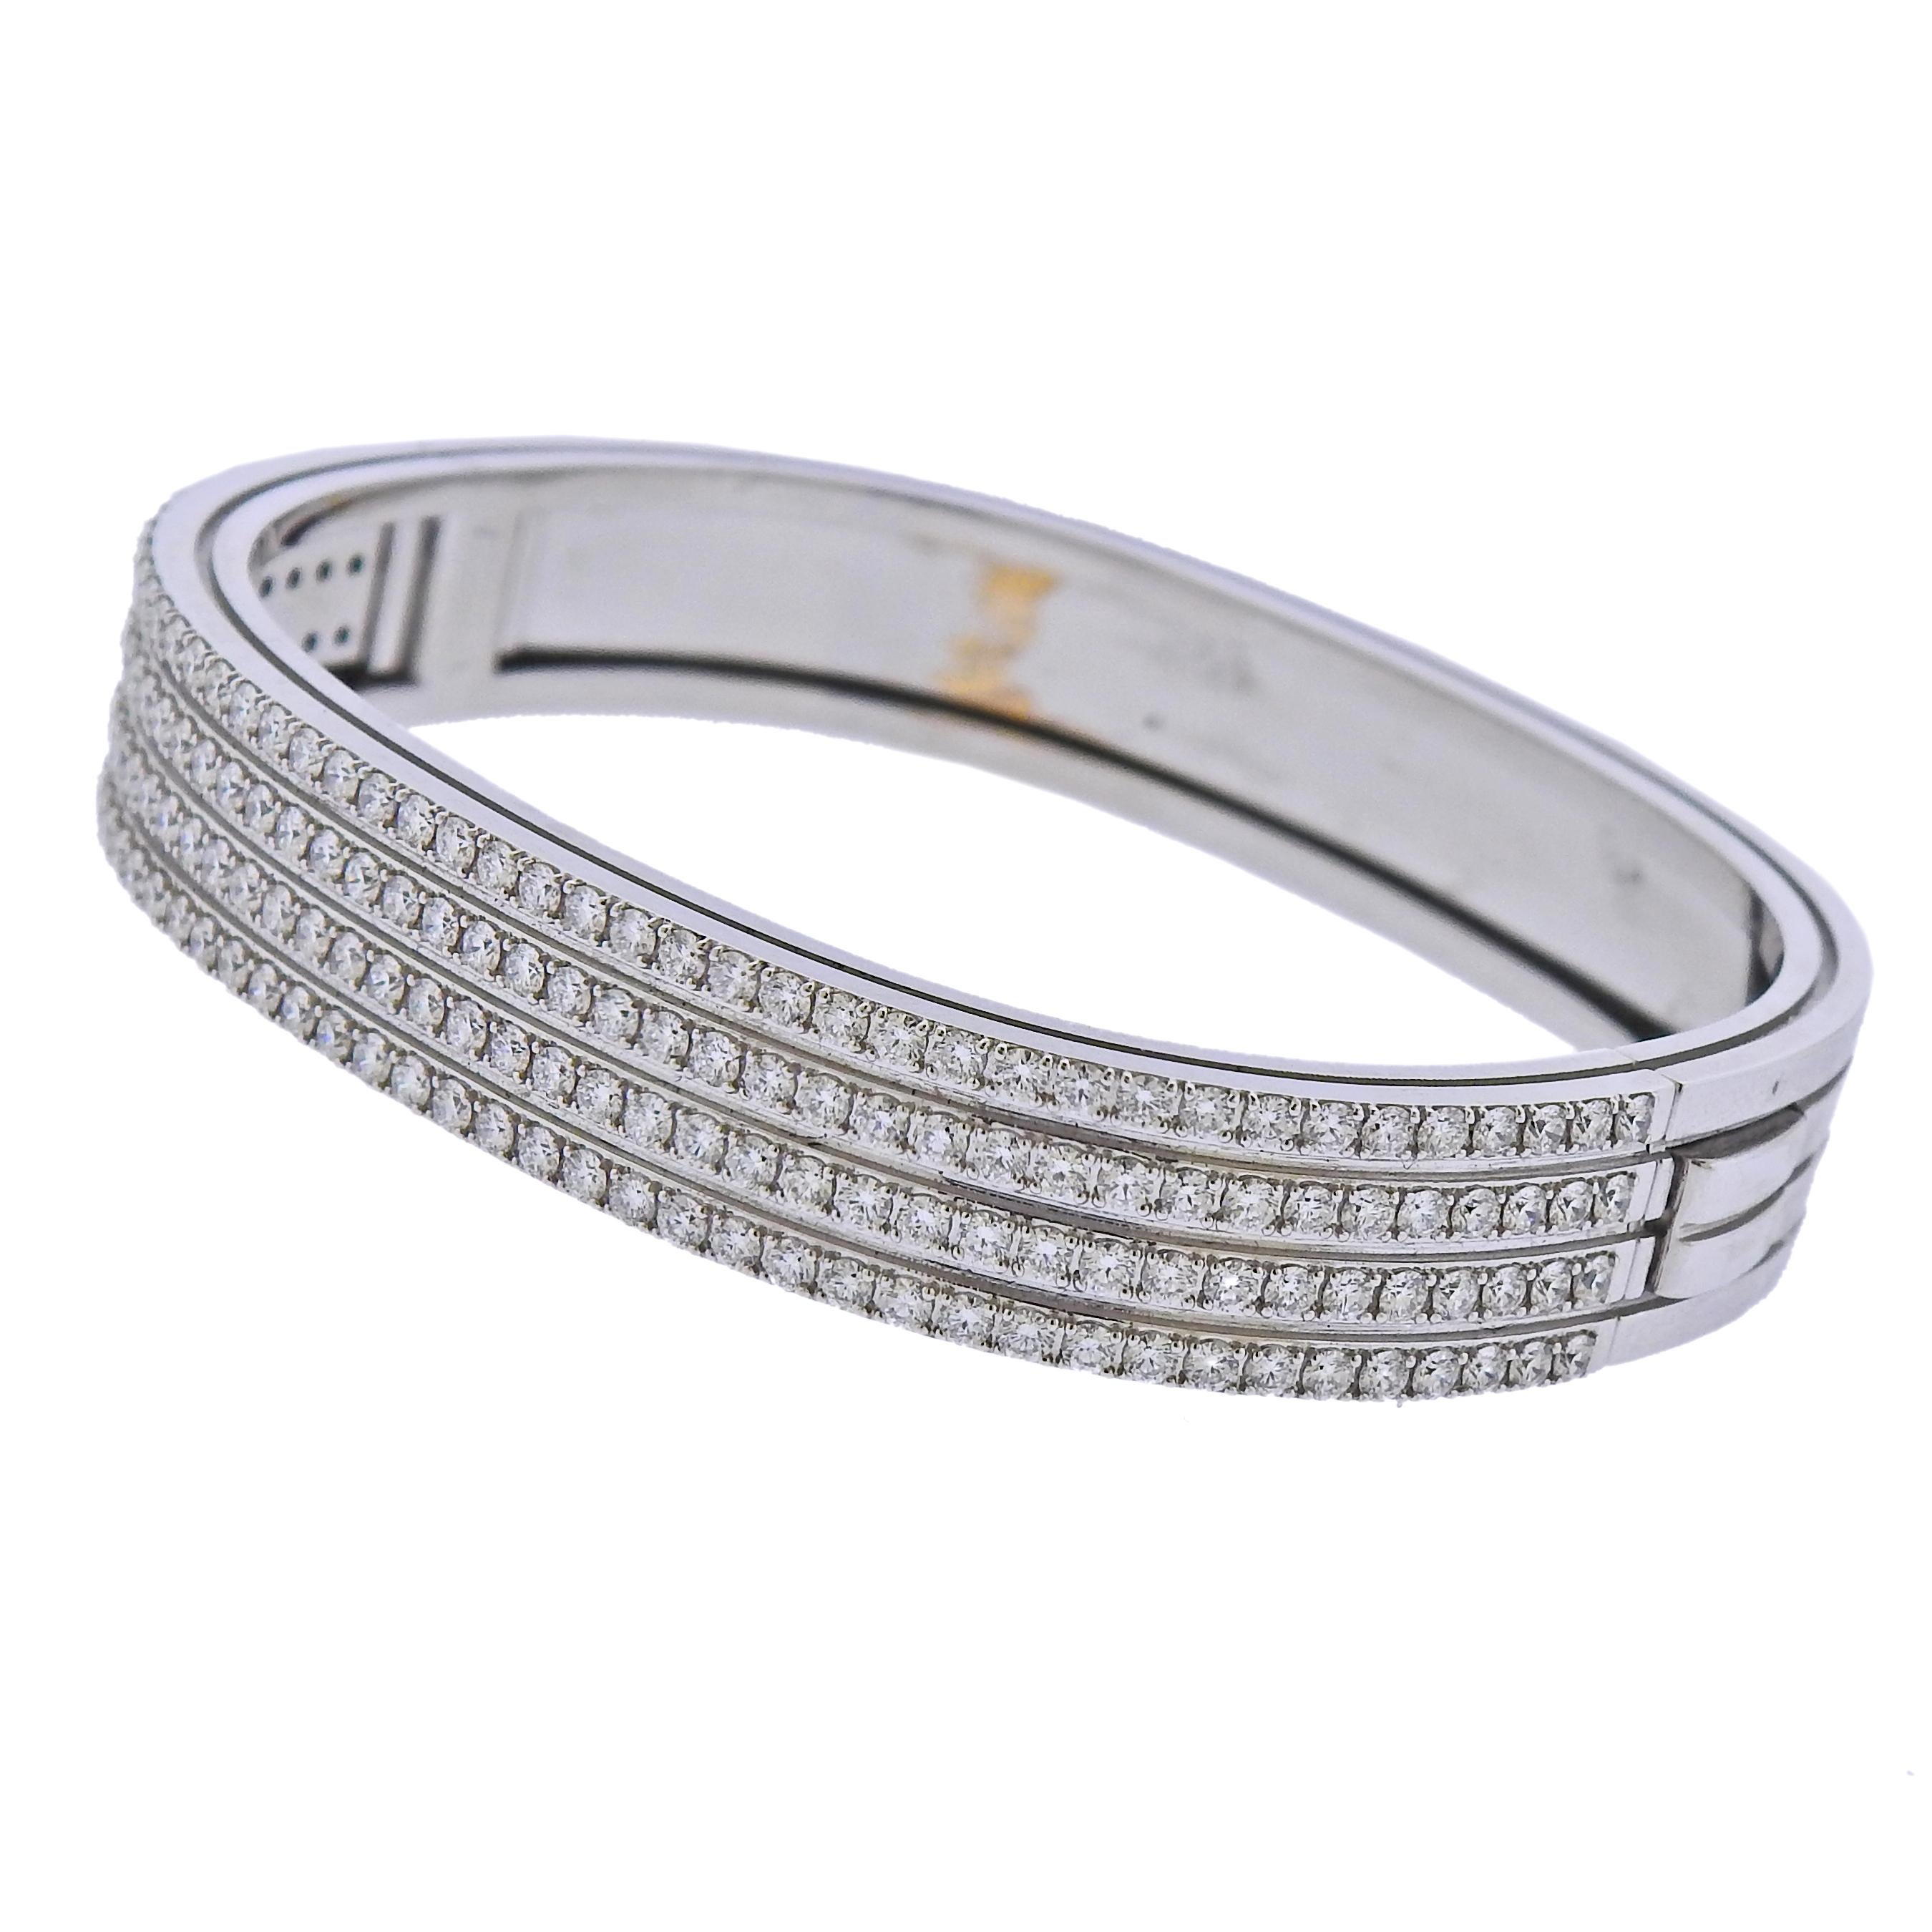 New 18k white gold Portofino bracelet by Roberto Coin, with approx. 3.75ctw in G/VS diamonds. Retail $21500, comes with box. Bracelet will fit approx. 7